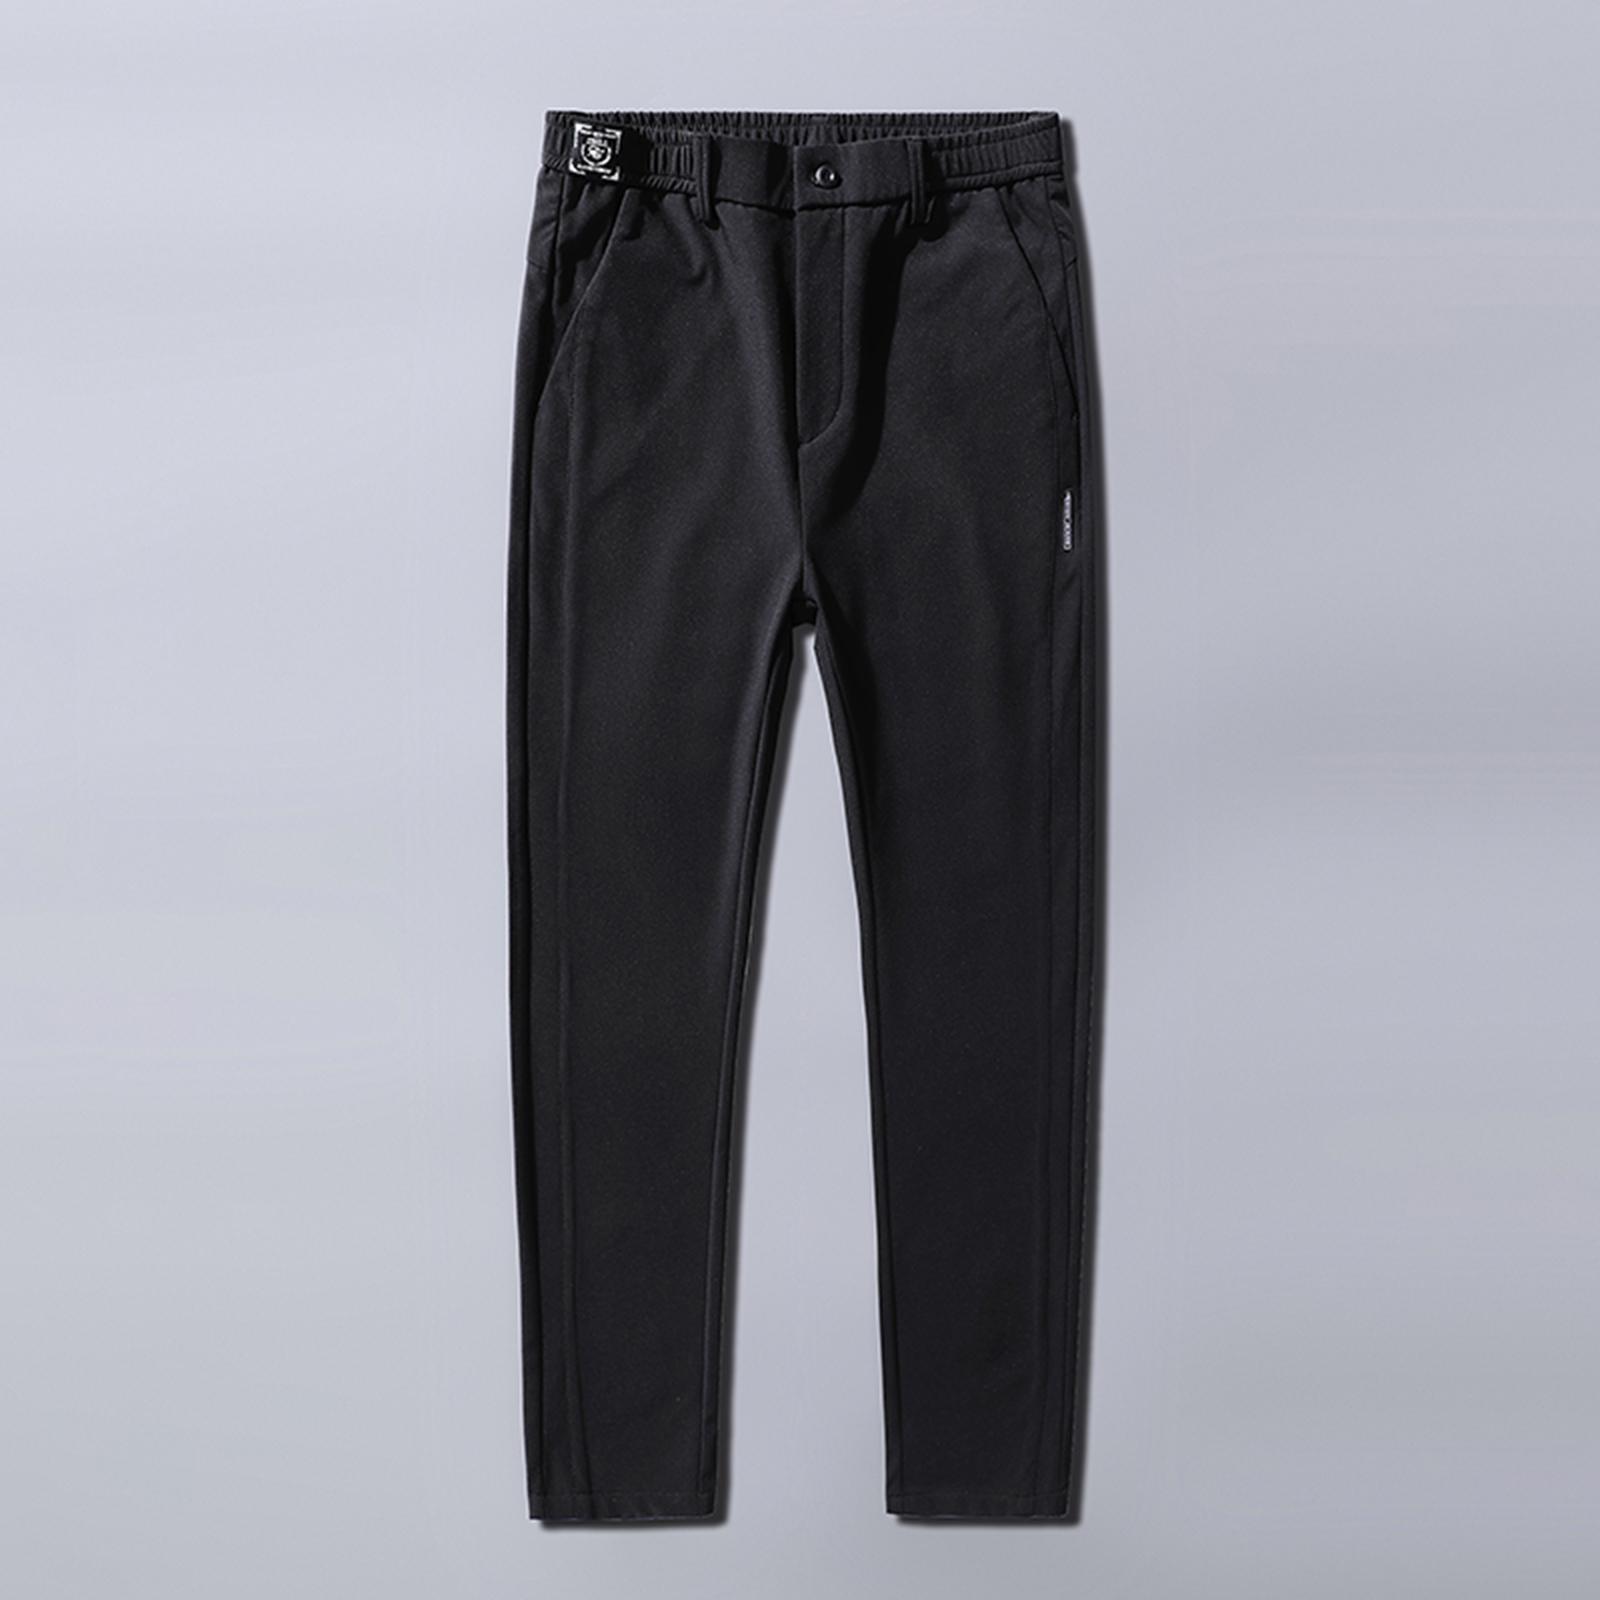 Men Casual Pants Relaxed Fit Summer Trousers Construction Boys Stretch Pants